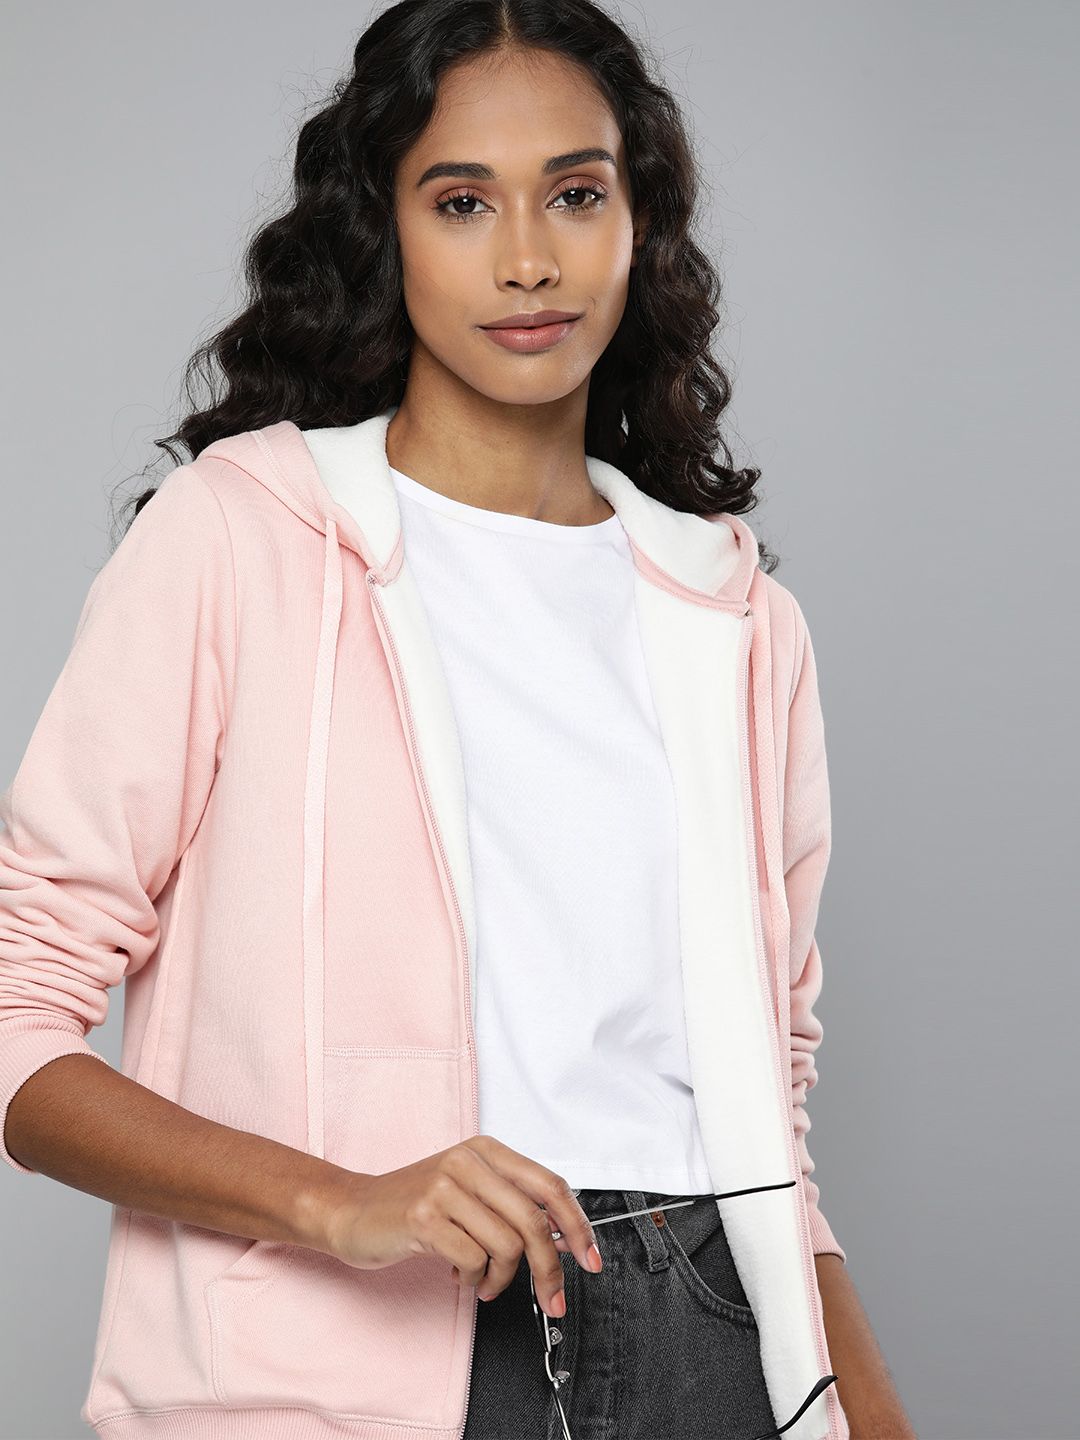 Levis Women Pink Solid Tailored Jacket Price in India